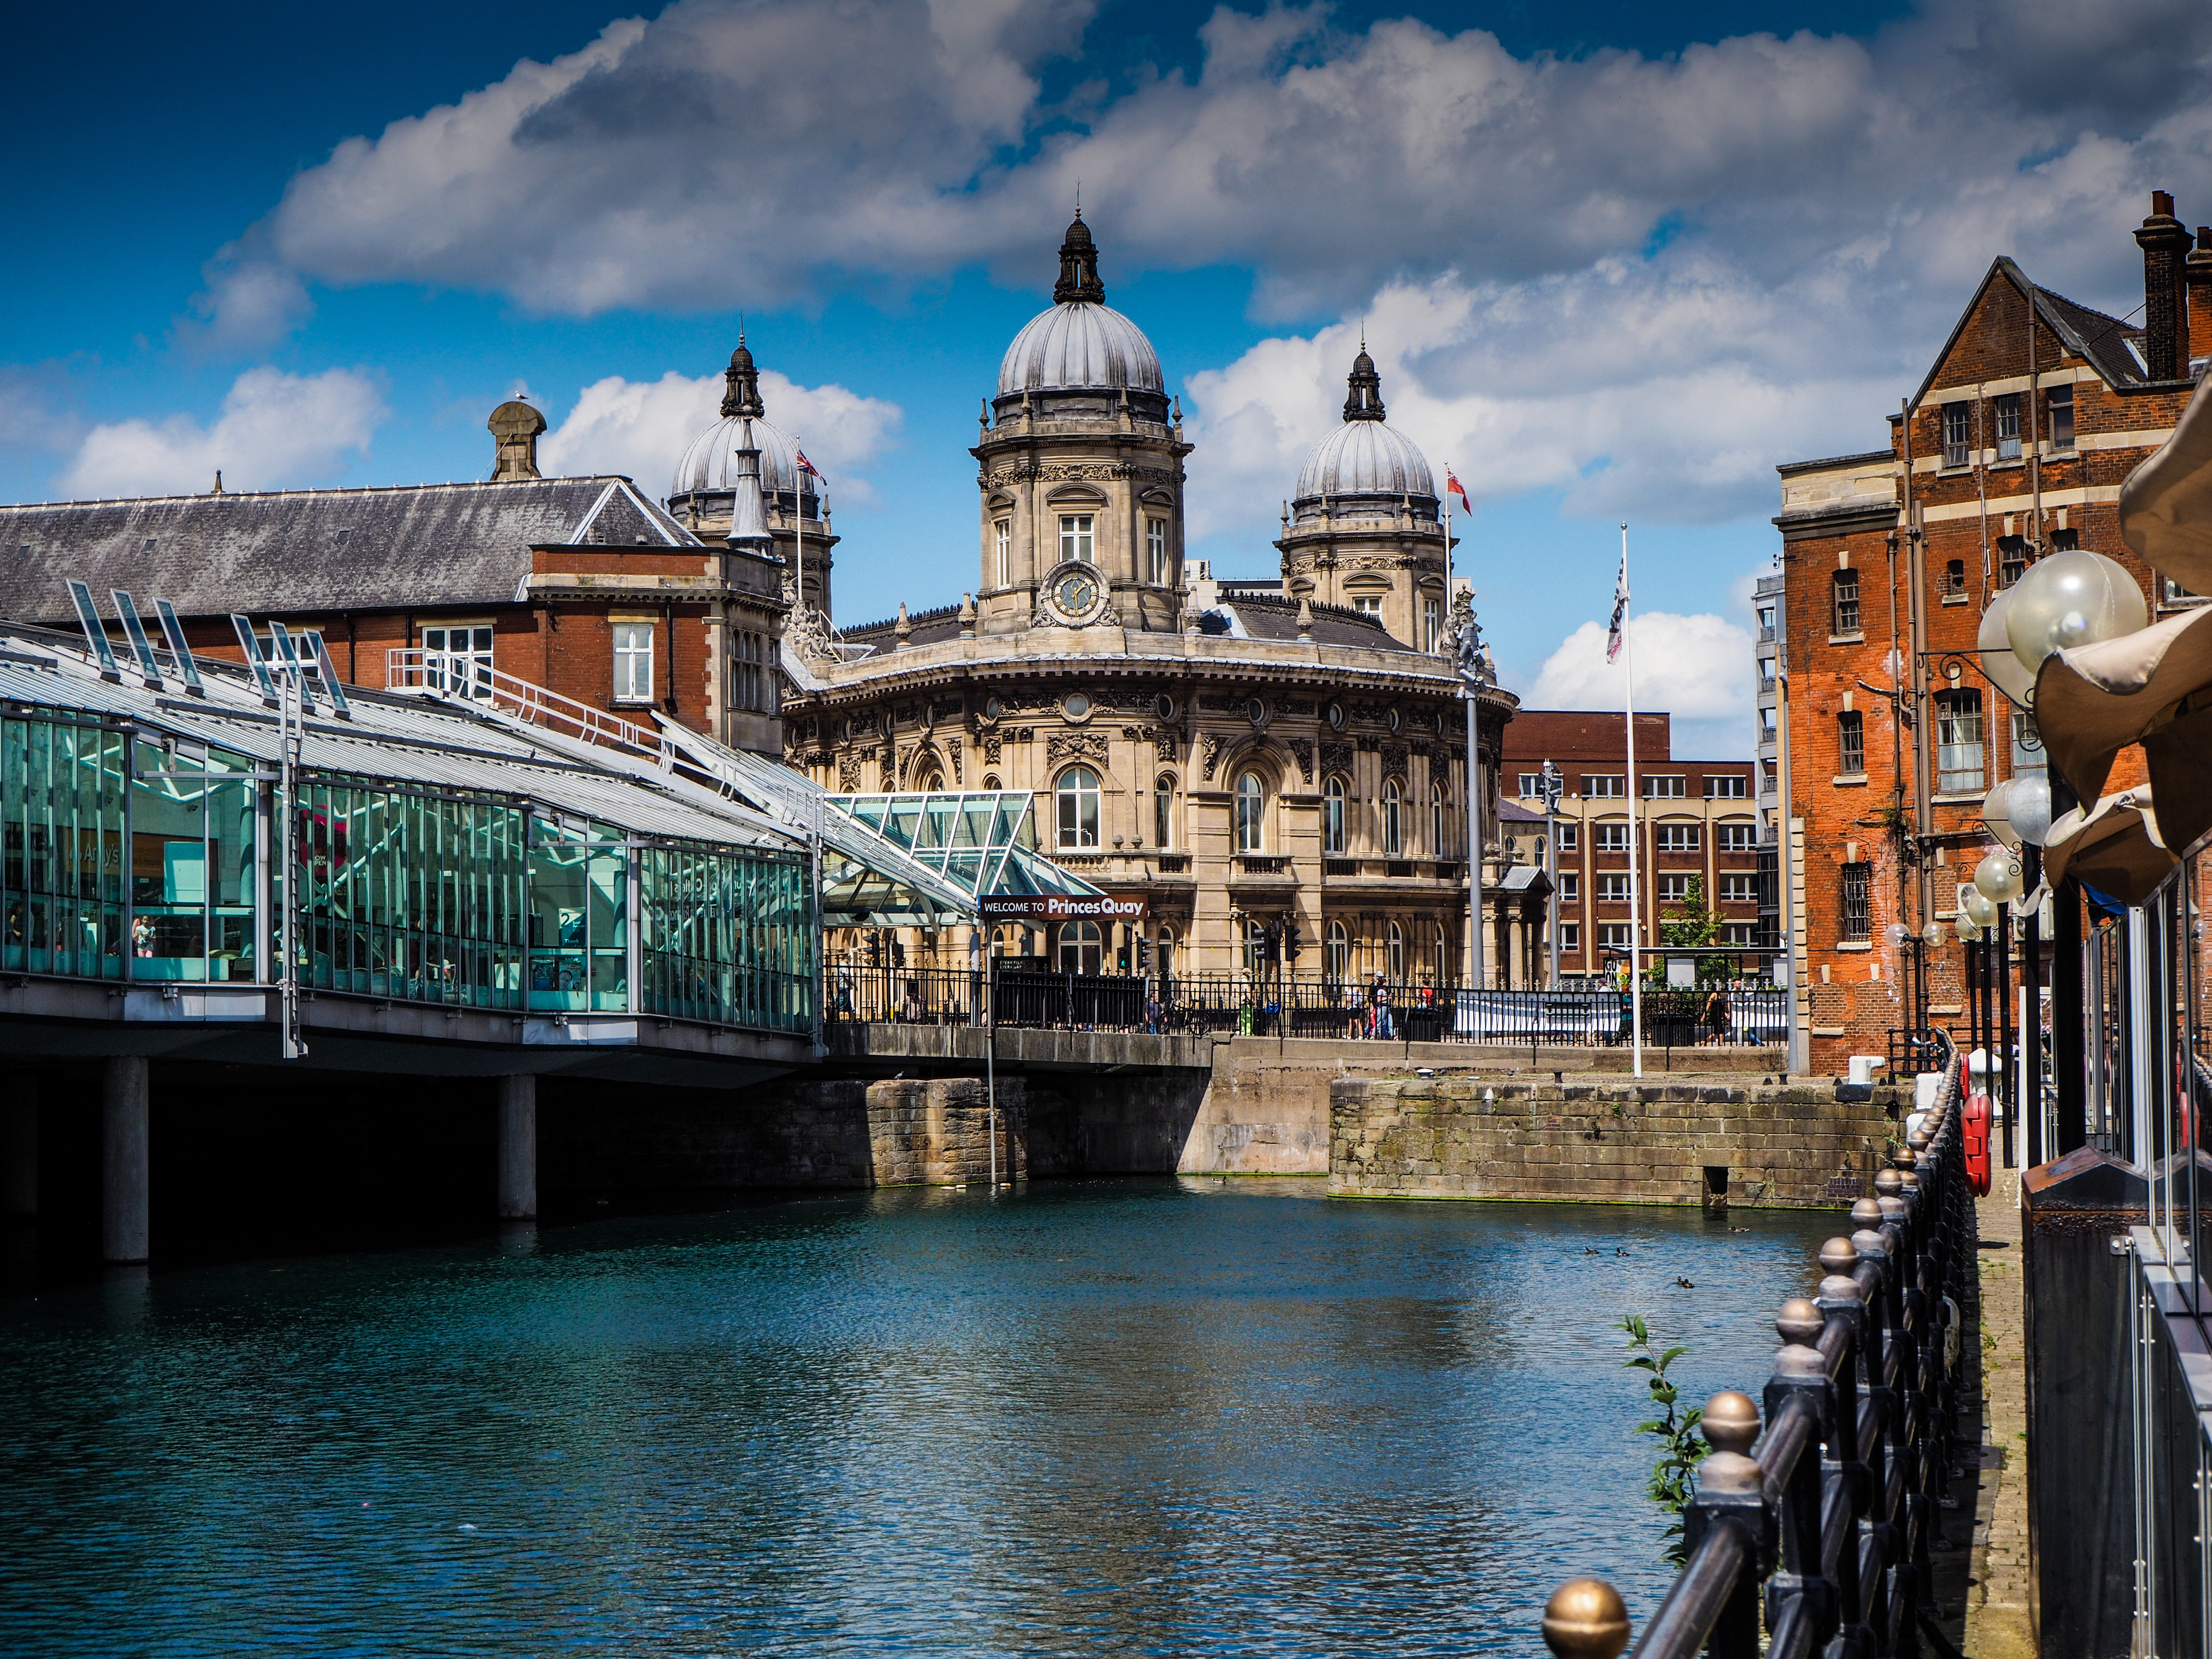 From its maritime history to its free walking tours another other cultural attractions, Hull has it all